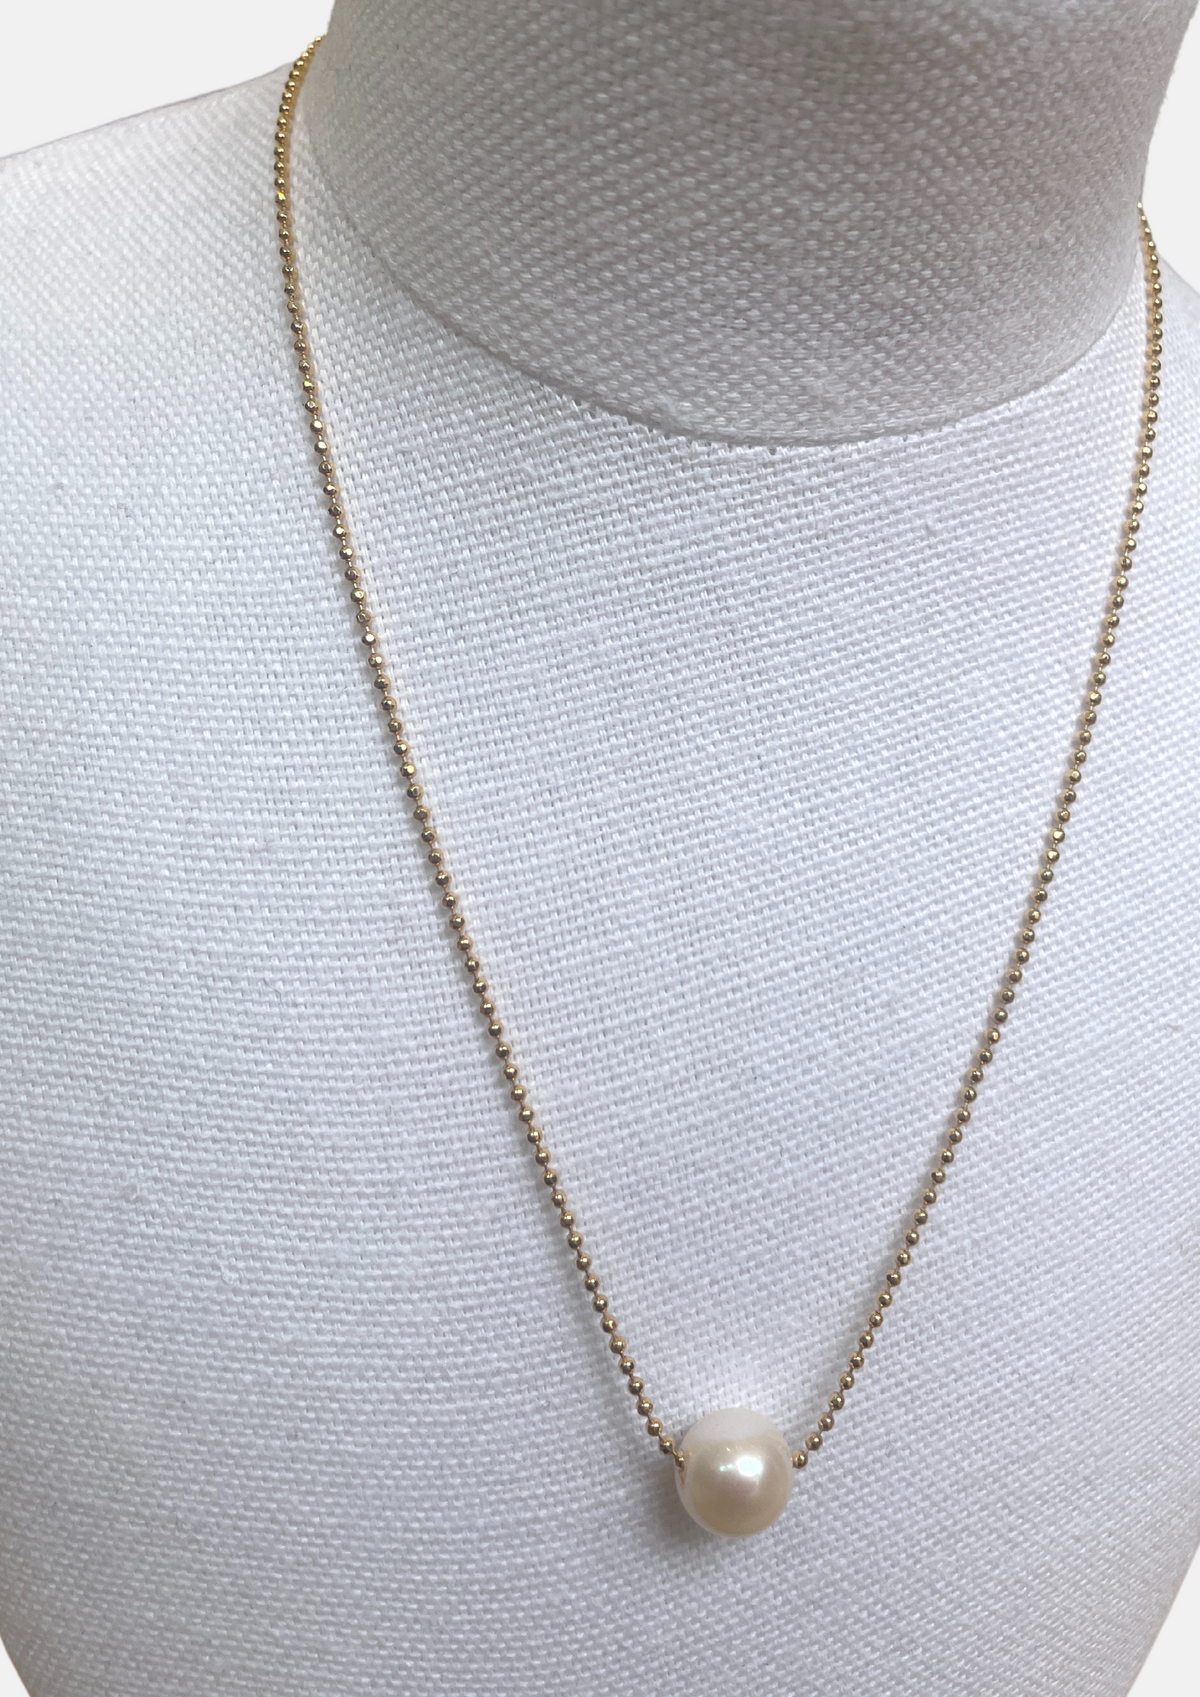 Simple pearl necklace with gold chain and singular pearl.